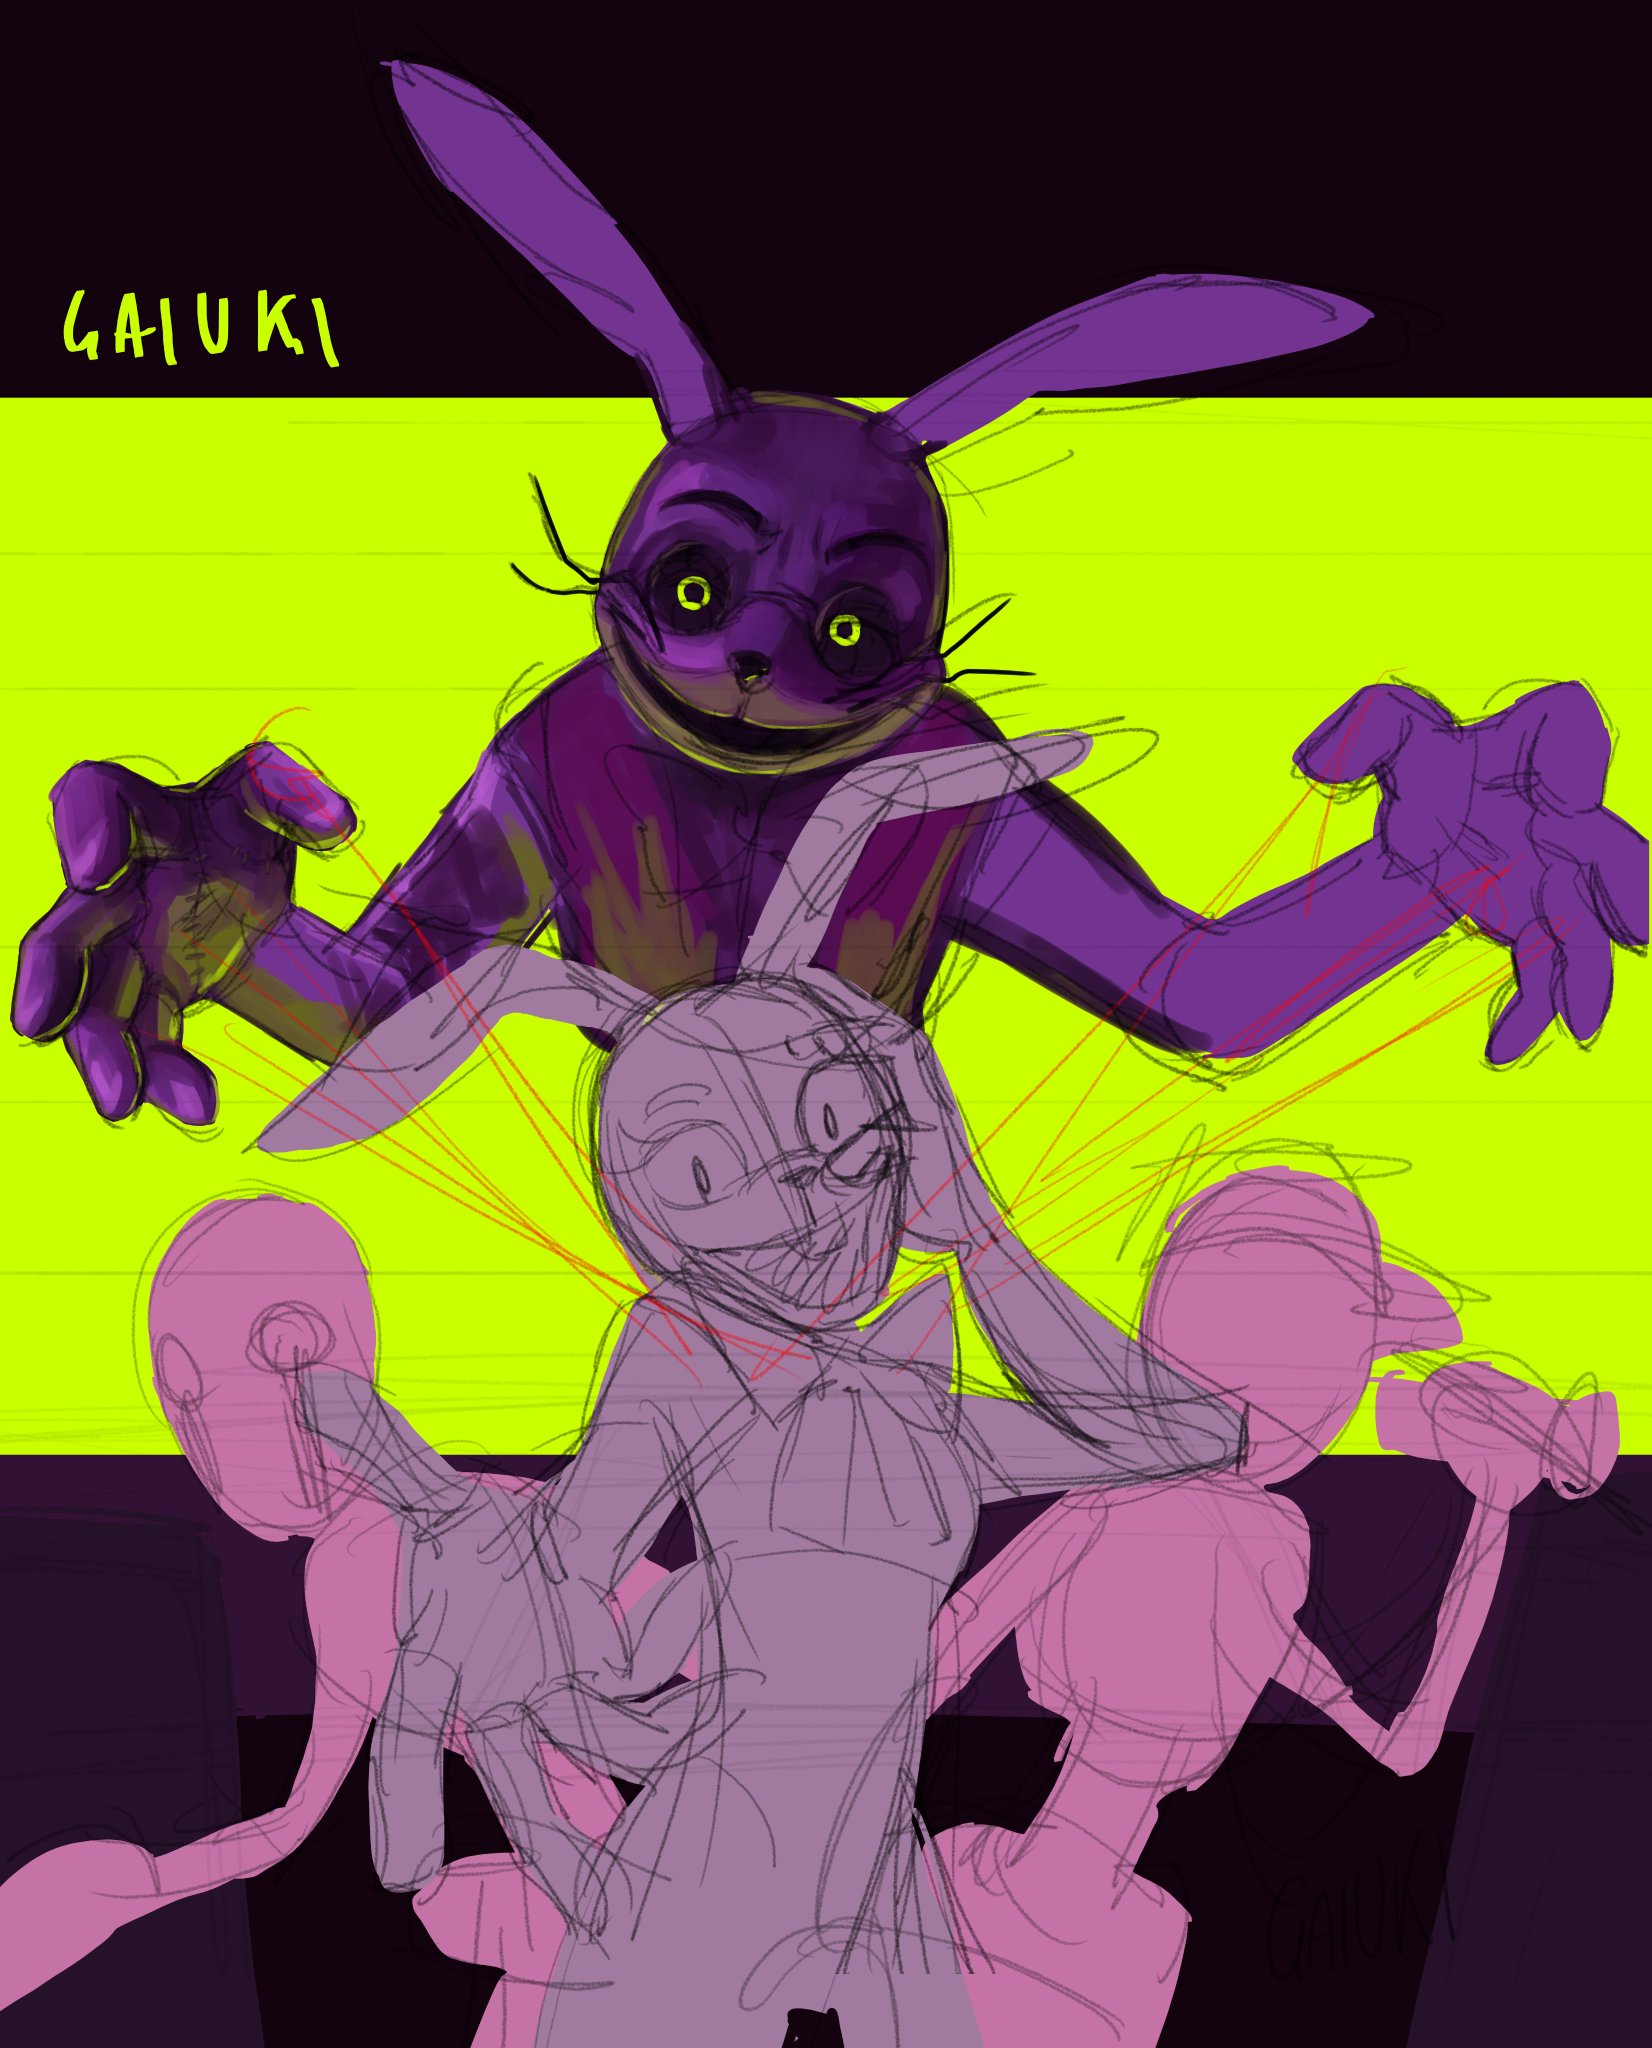 Gaiuki-COMMISSIONS OPEN on X: wip fanart of glitchtrap and vanny #FNAF  #fnafsecuritybreach  / X